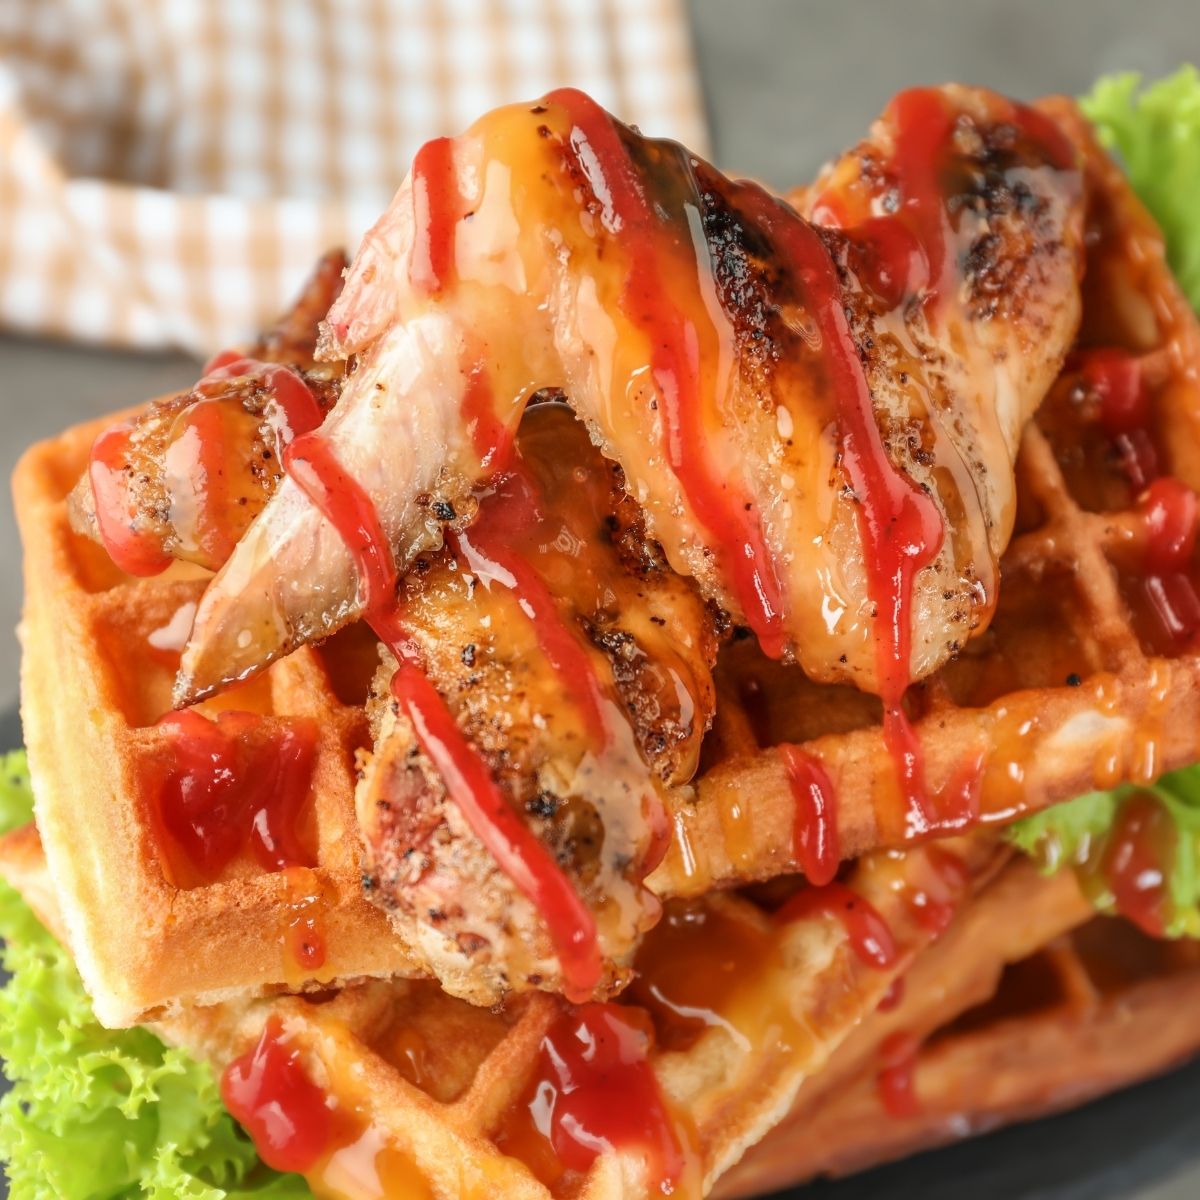 Buffalo chicken wings on top of a stack of 3 waffles over lettuce leaves